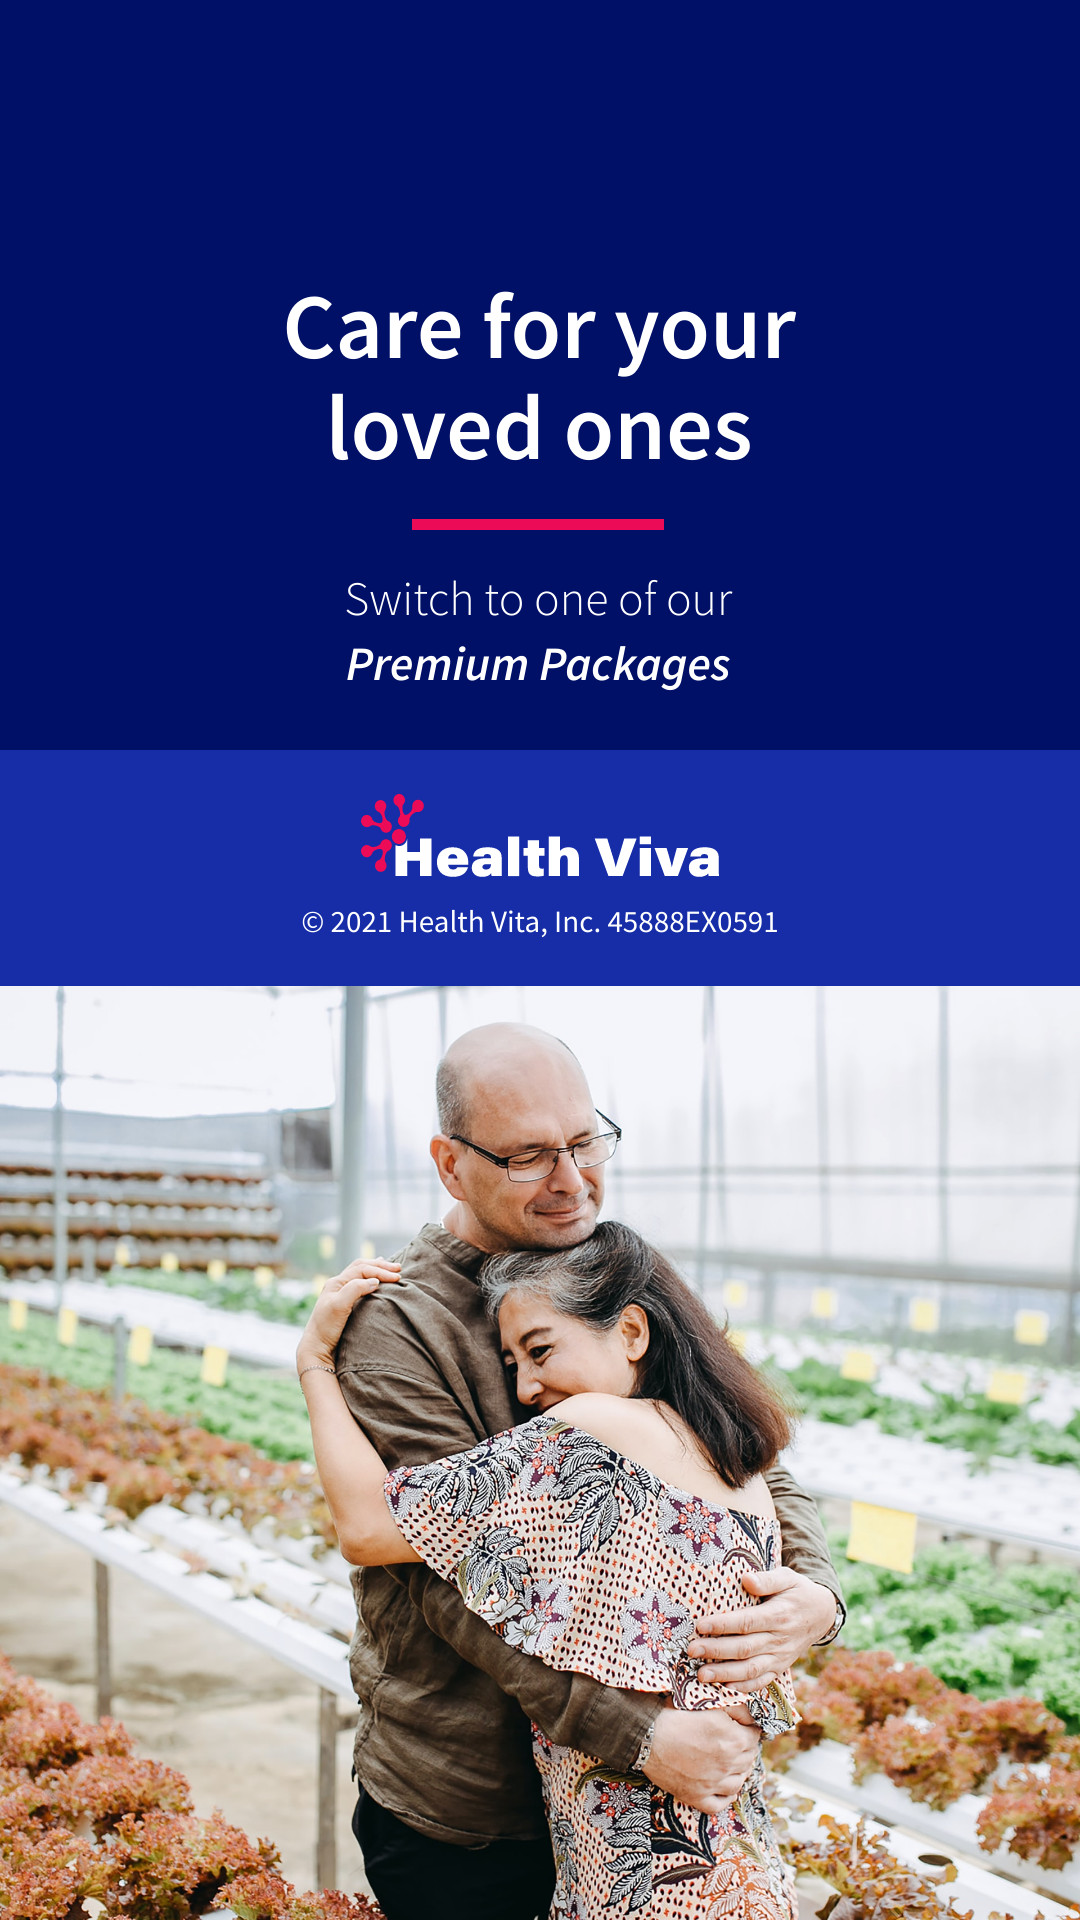 Care for Your Loved Ones with Health Insurance